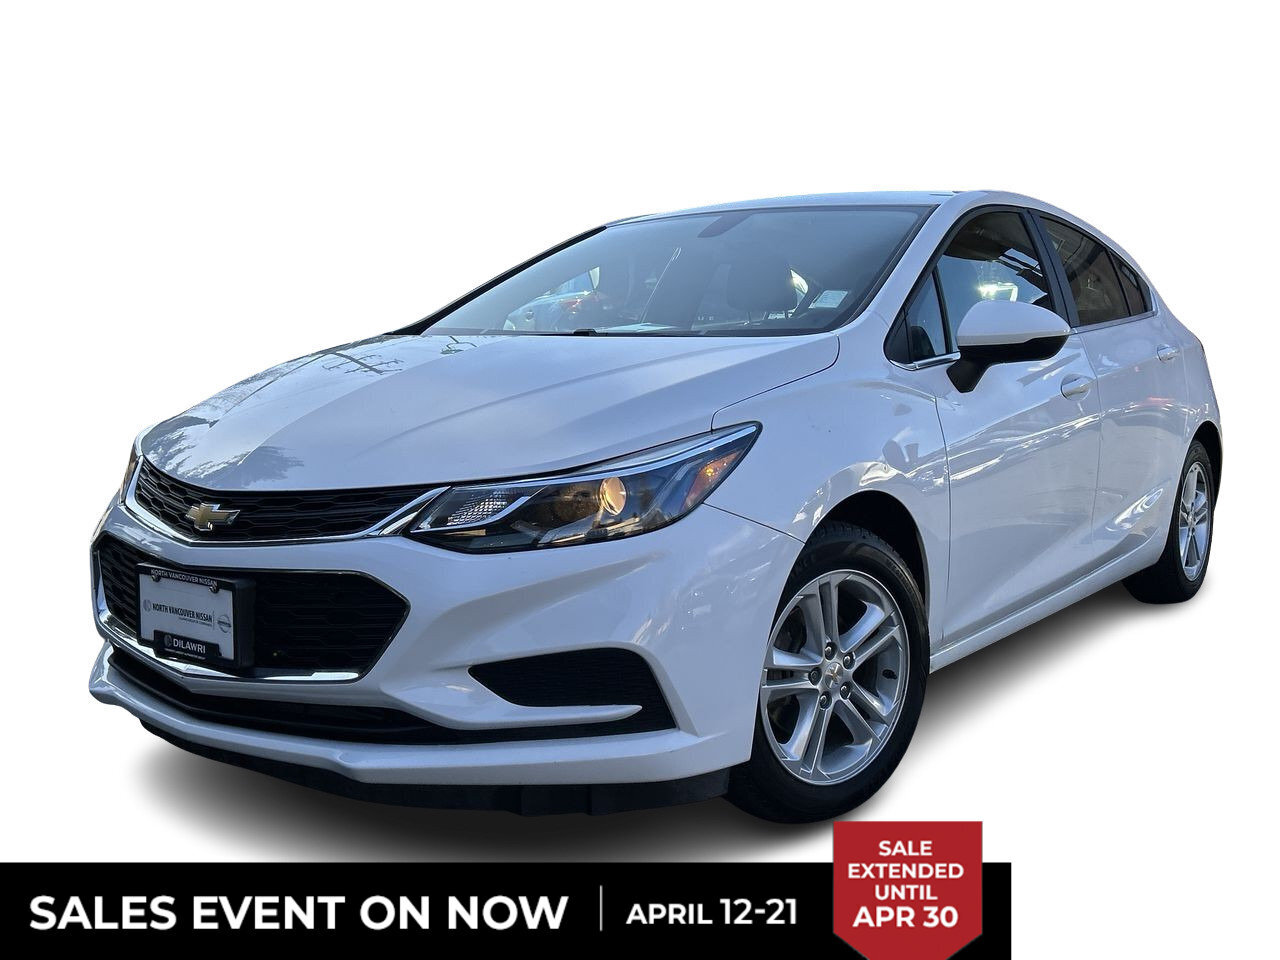 2017 Chevrolet Cruze LT - 6AT *Local, Well Maintained*